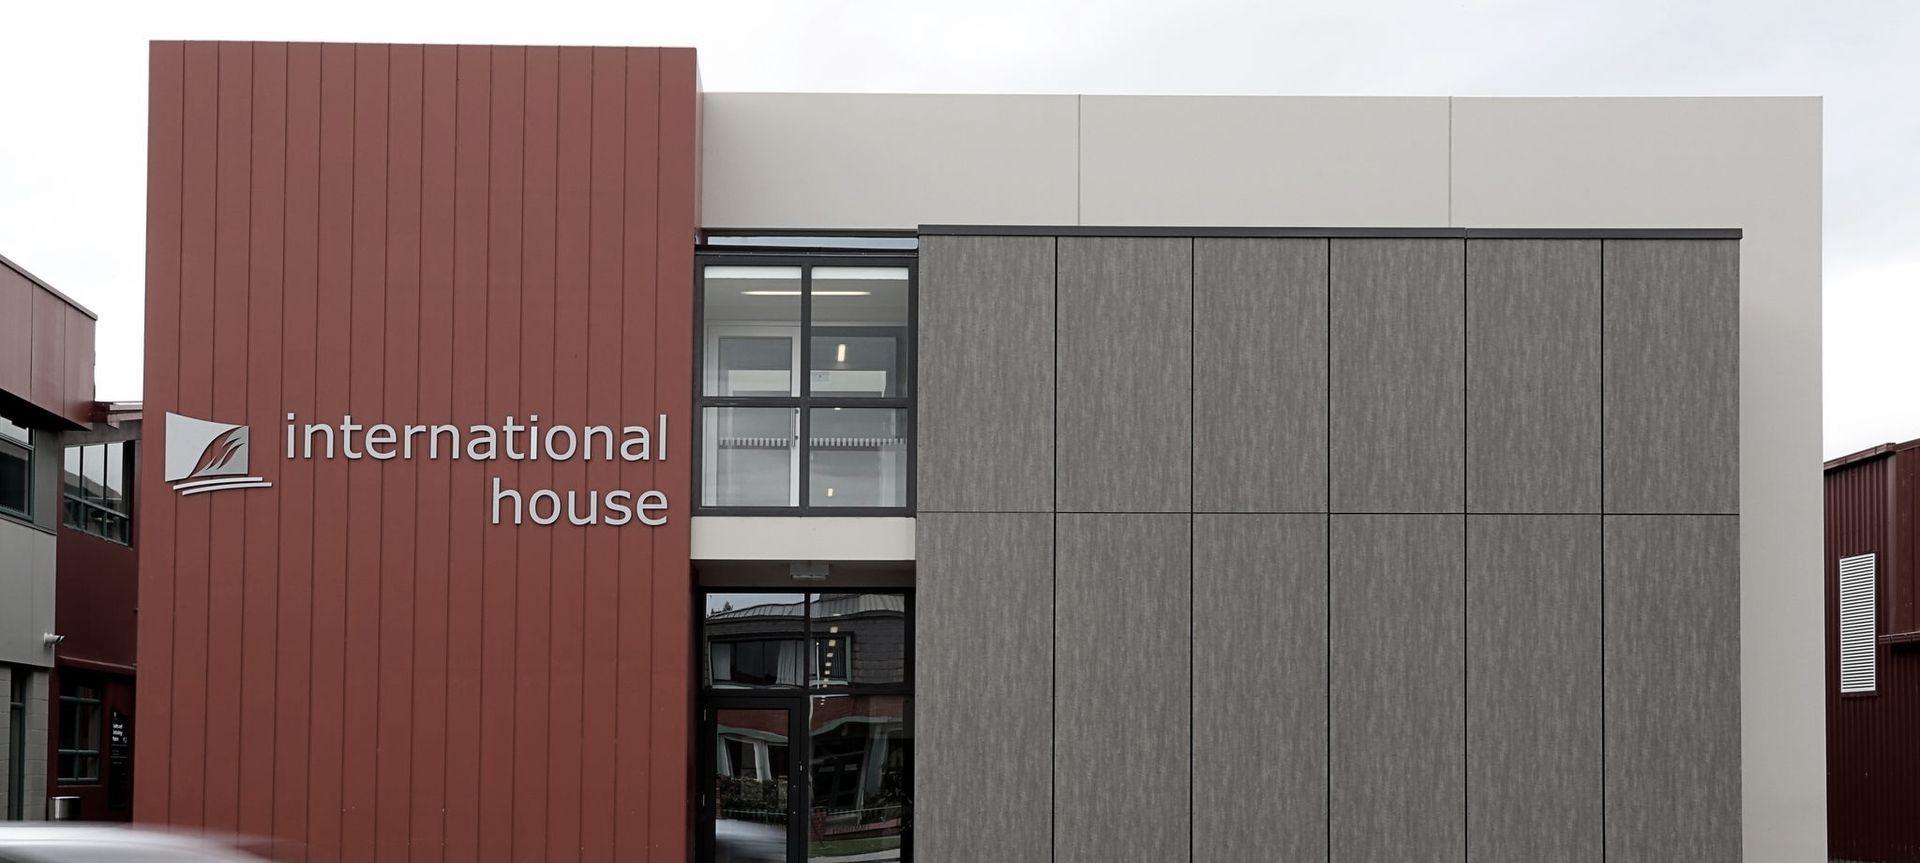 Southern Institute of Technology International House banner